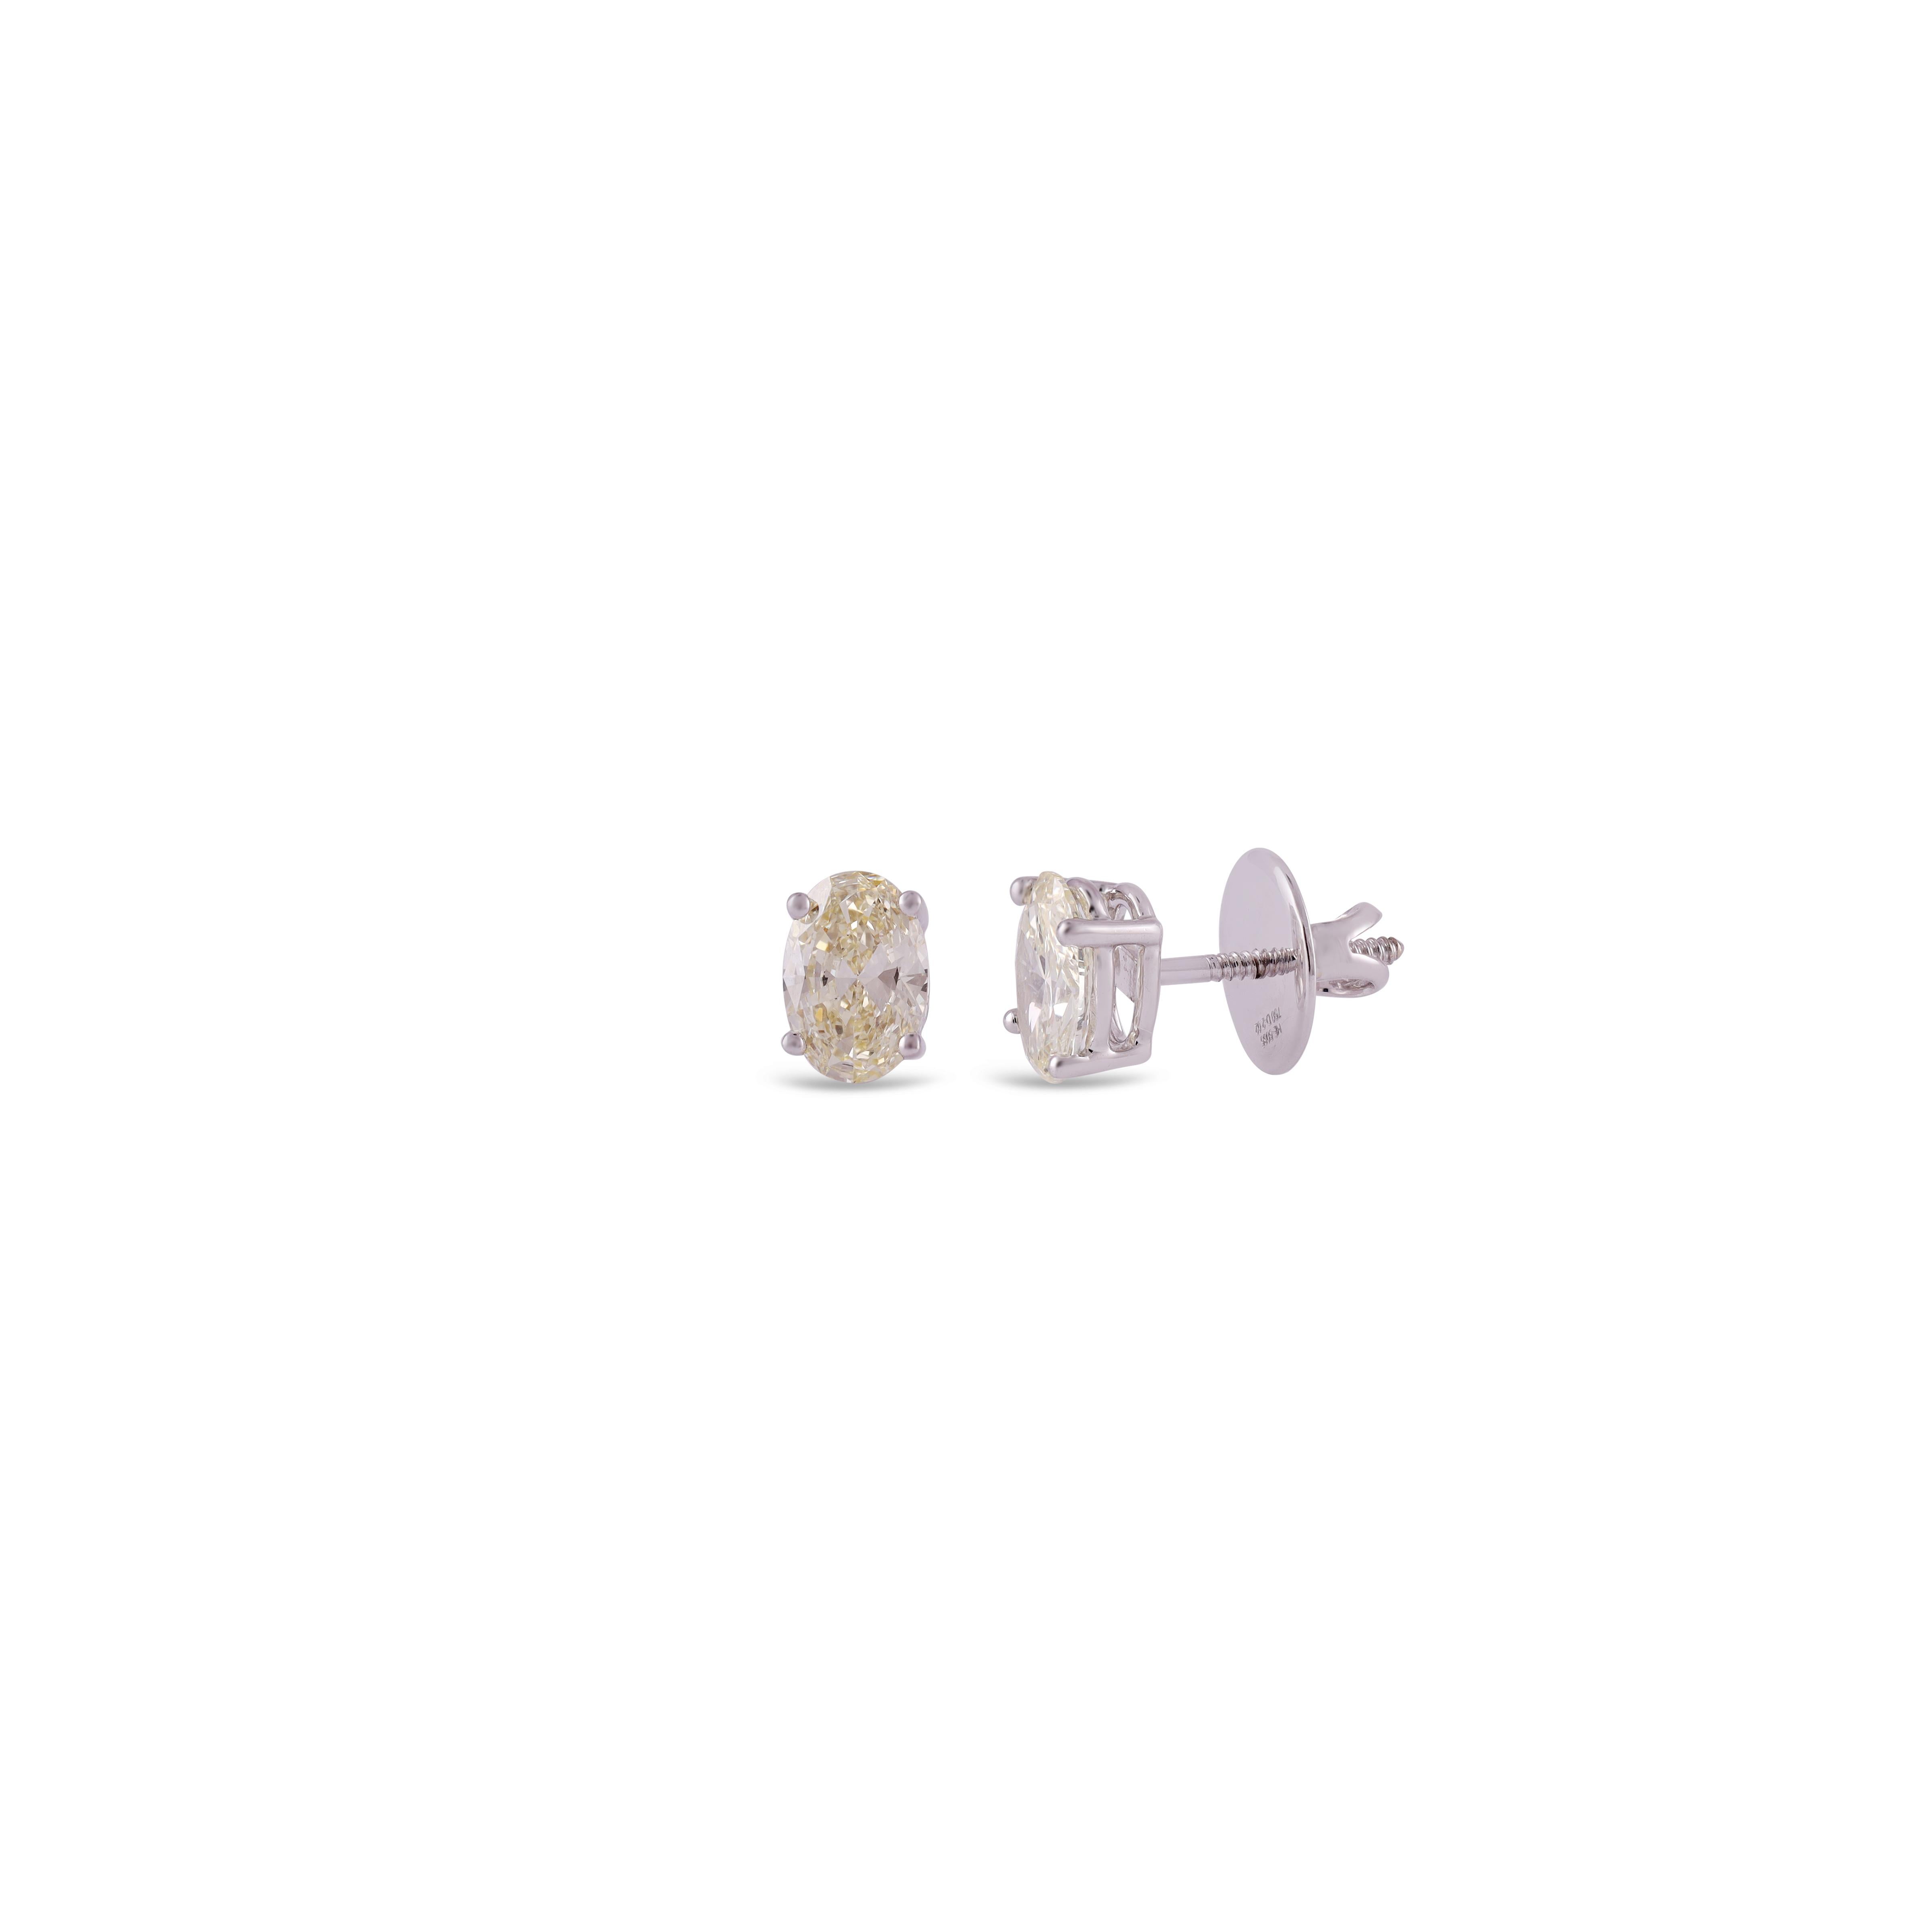 Contemporary 2.02 Carat Fancy Solitaire Diamond Earring Studded in 18 Karat White Gold For Sale